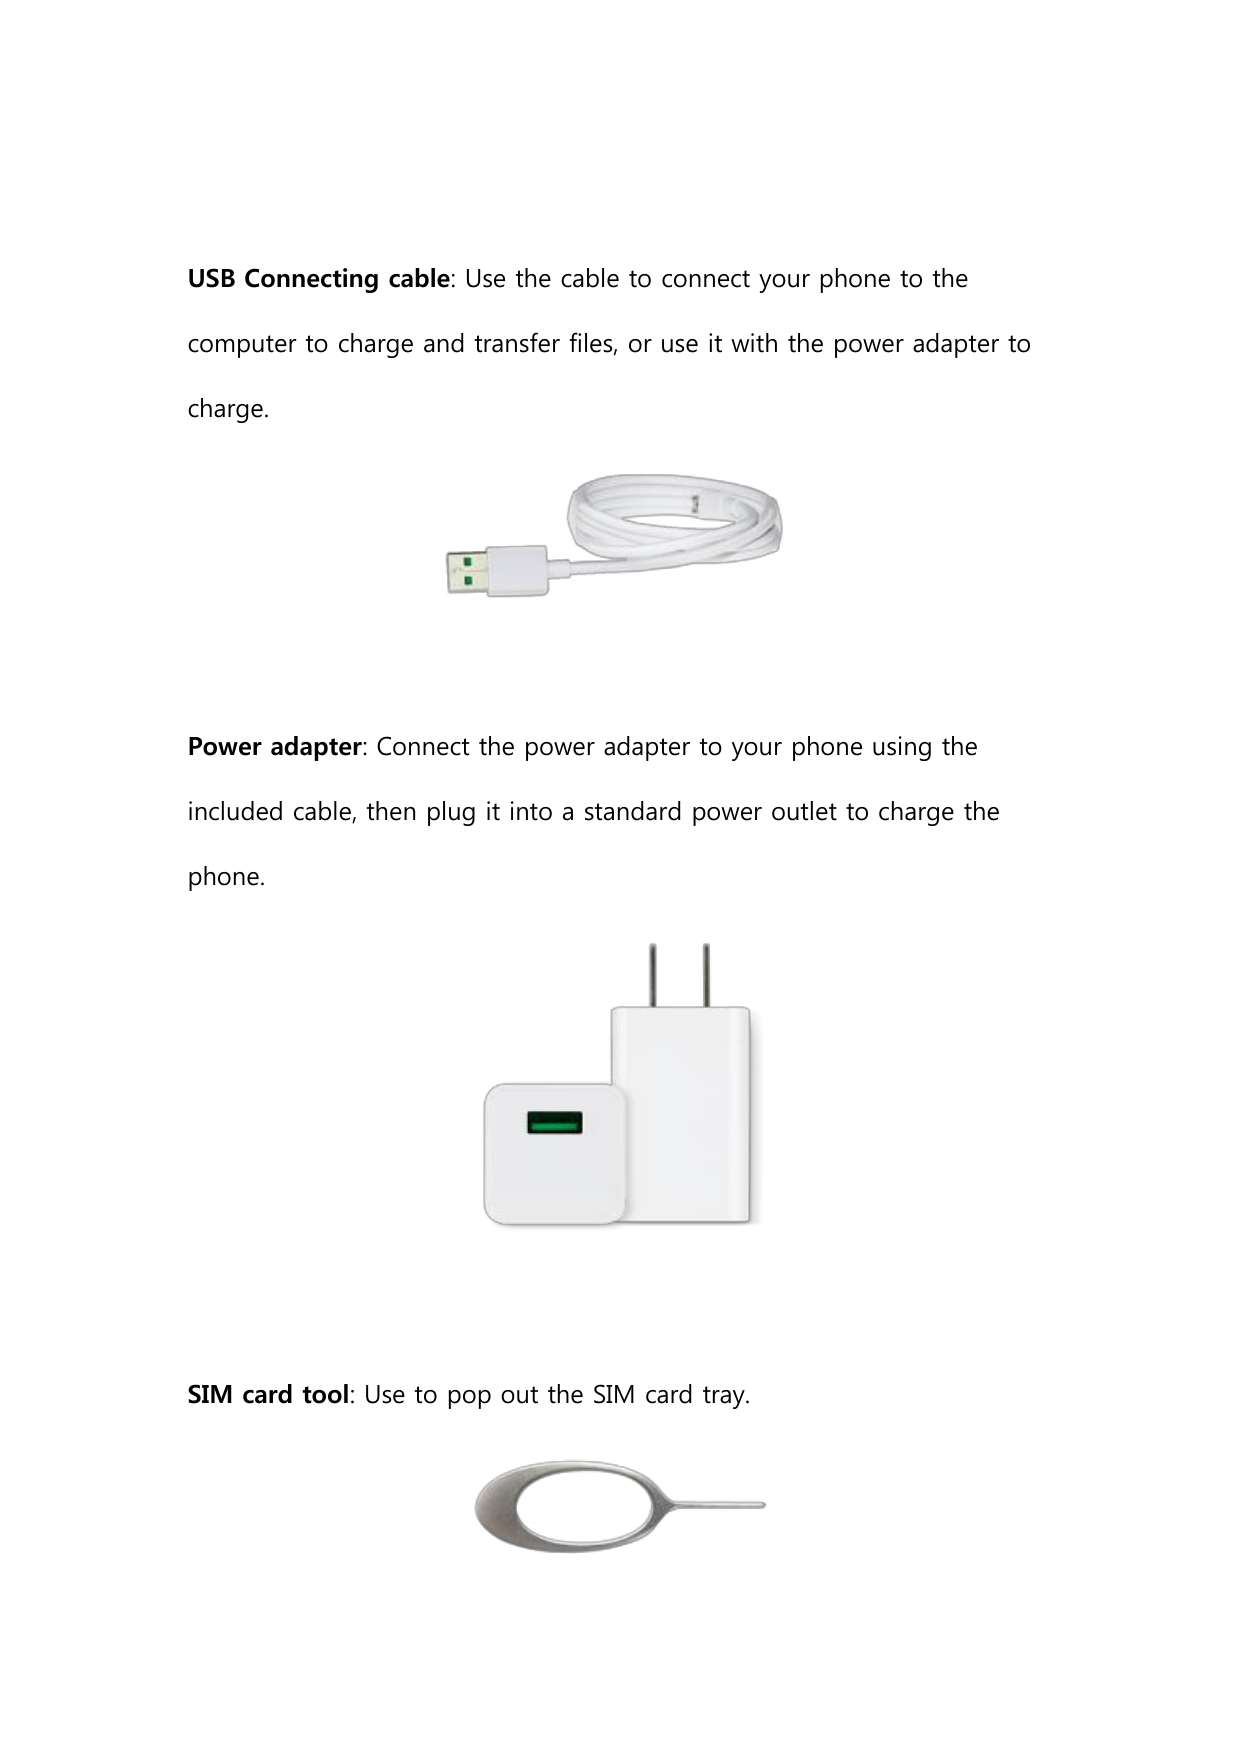 USB Connecting cable: Use the cable to connect your phone to thecomputer to charge and transfer files, or use it with the power 